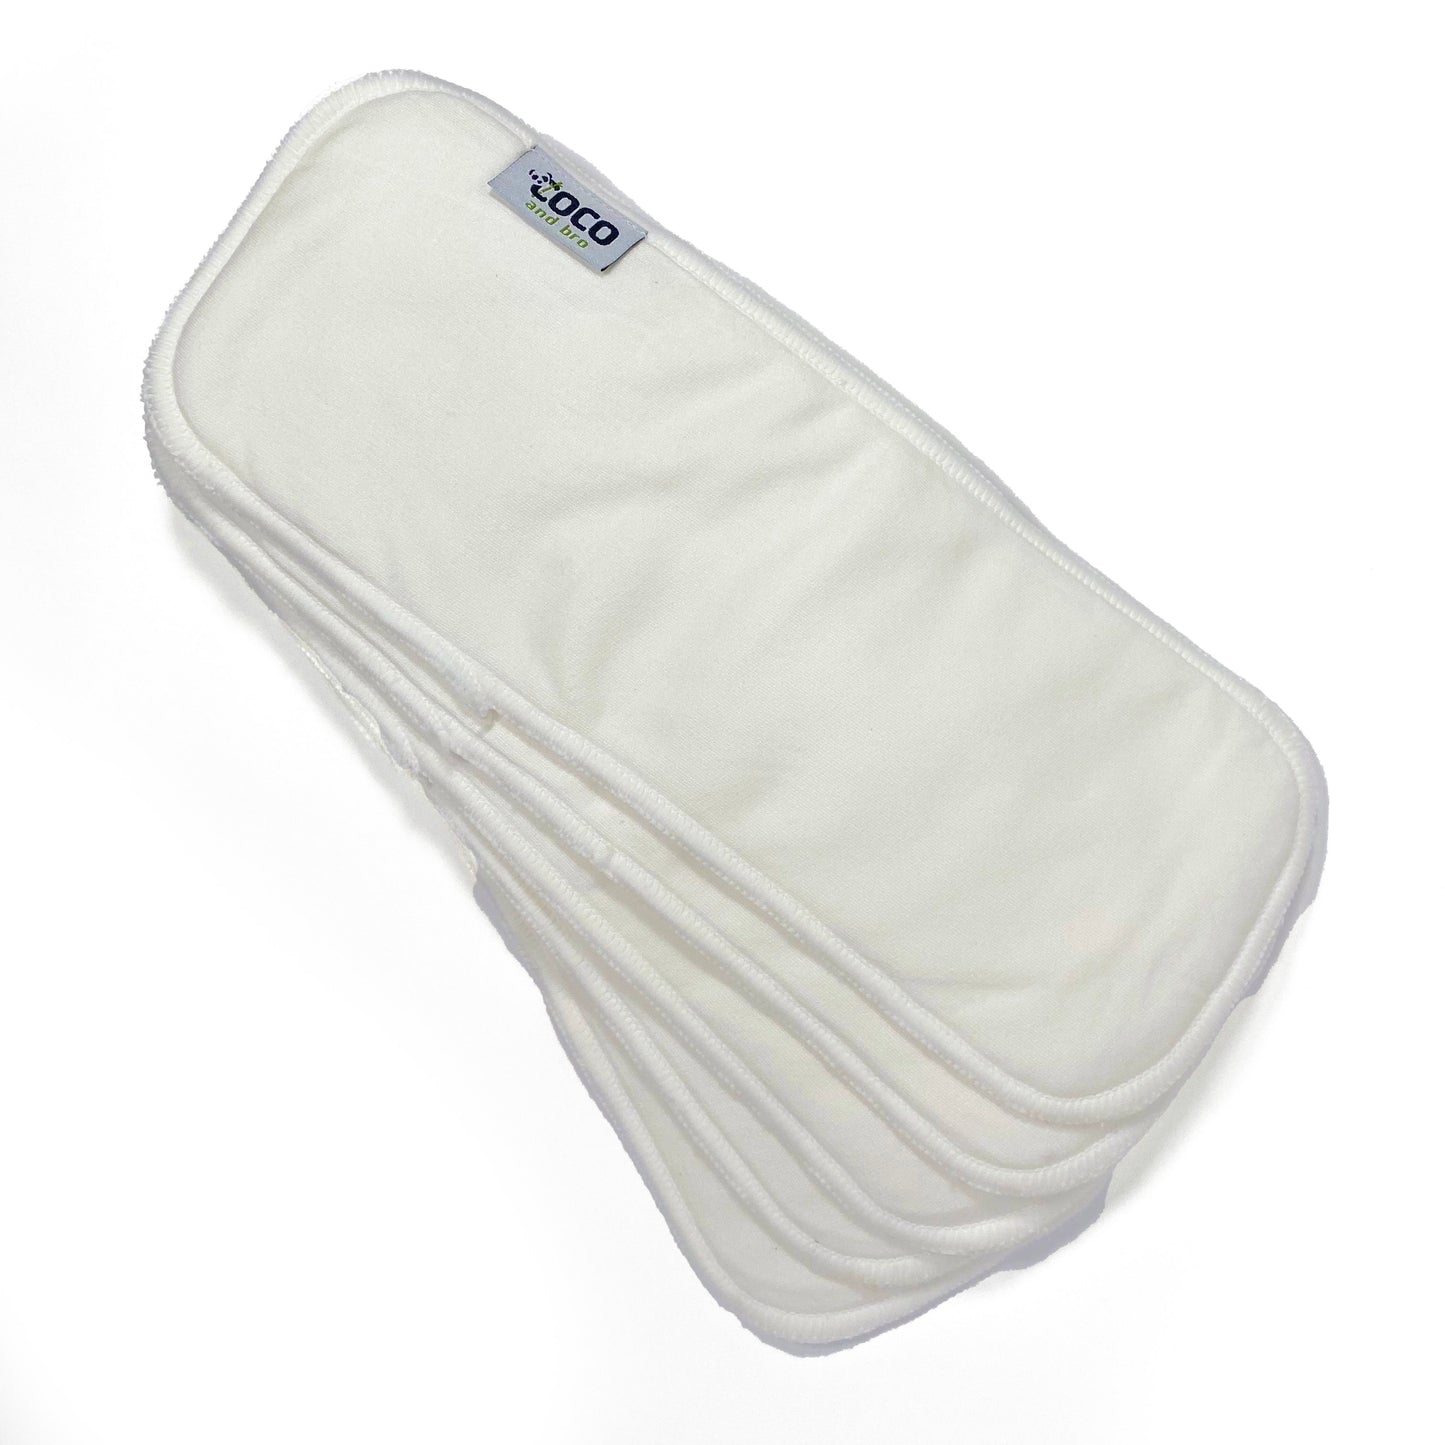 A set of five reusable nappy inserts/liners, crafted with care from a blend of two layers of luxuriously soft bamboo fibres and two layers of ultra-absorbent microfibre.